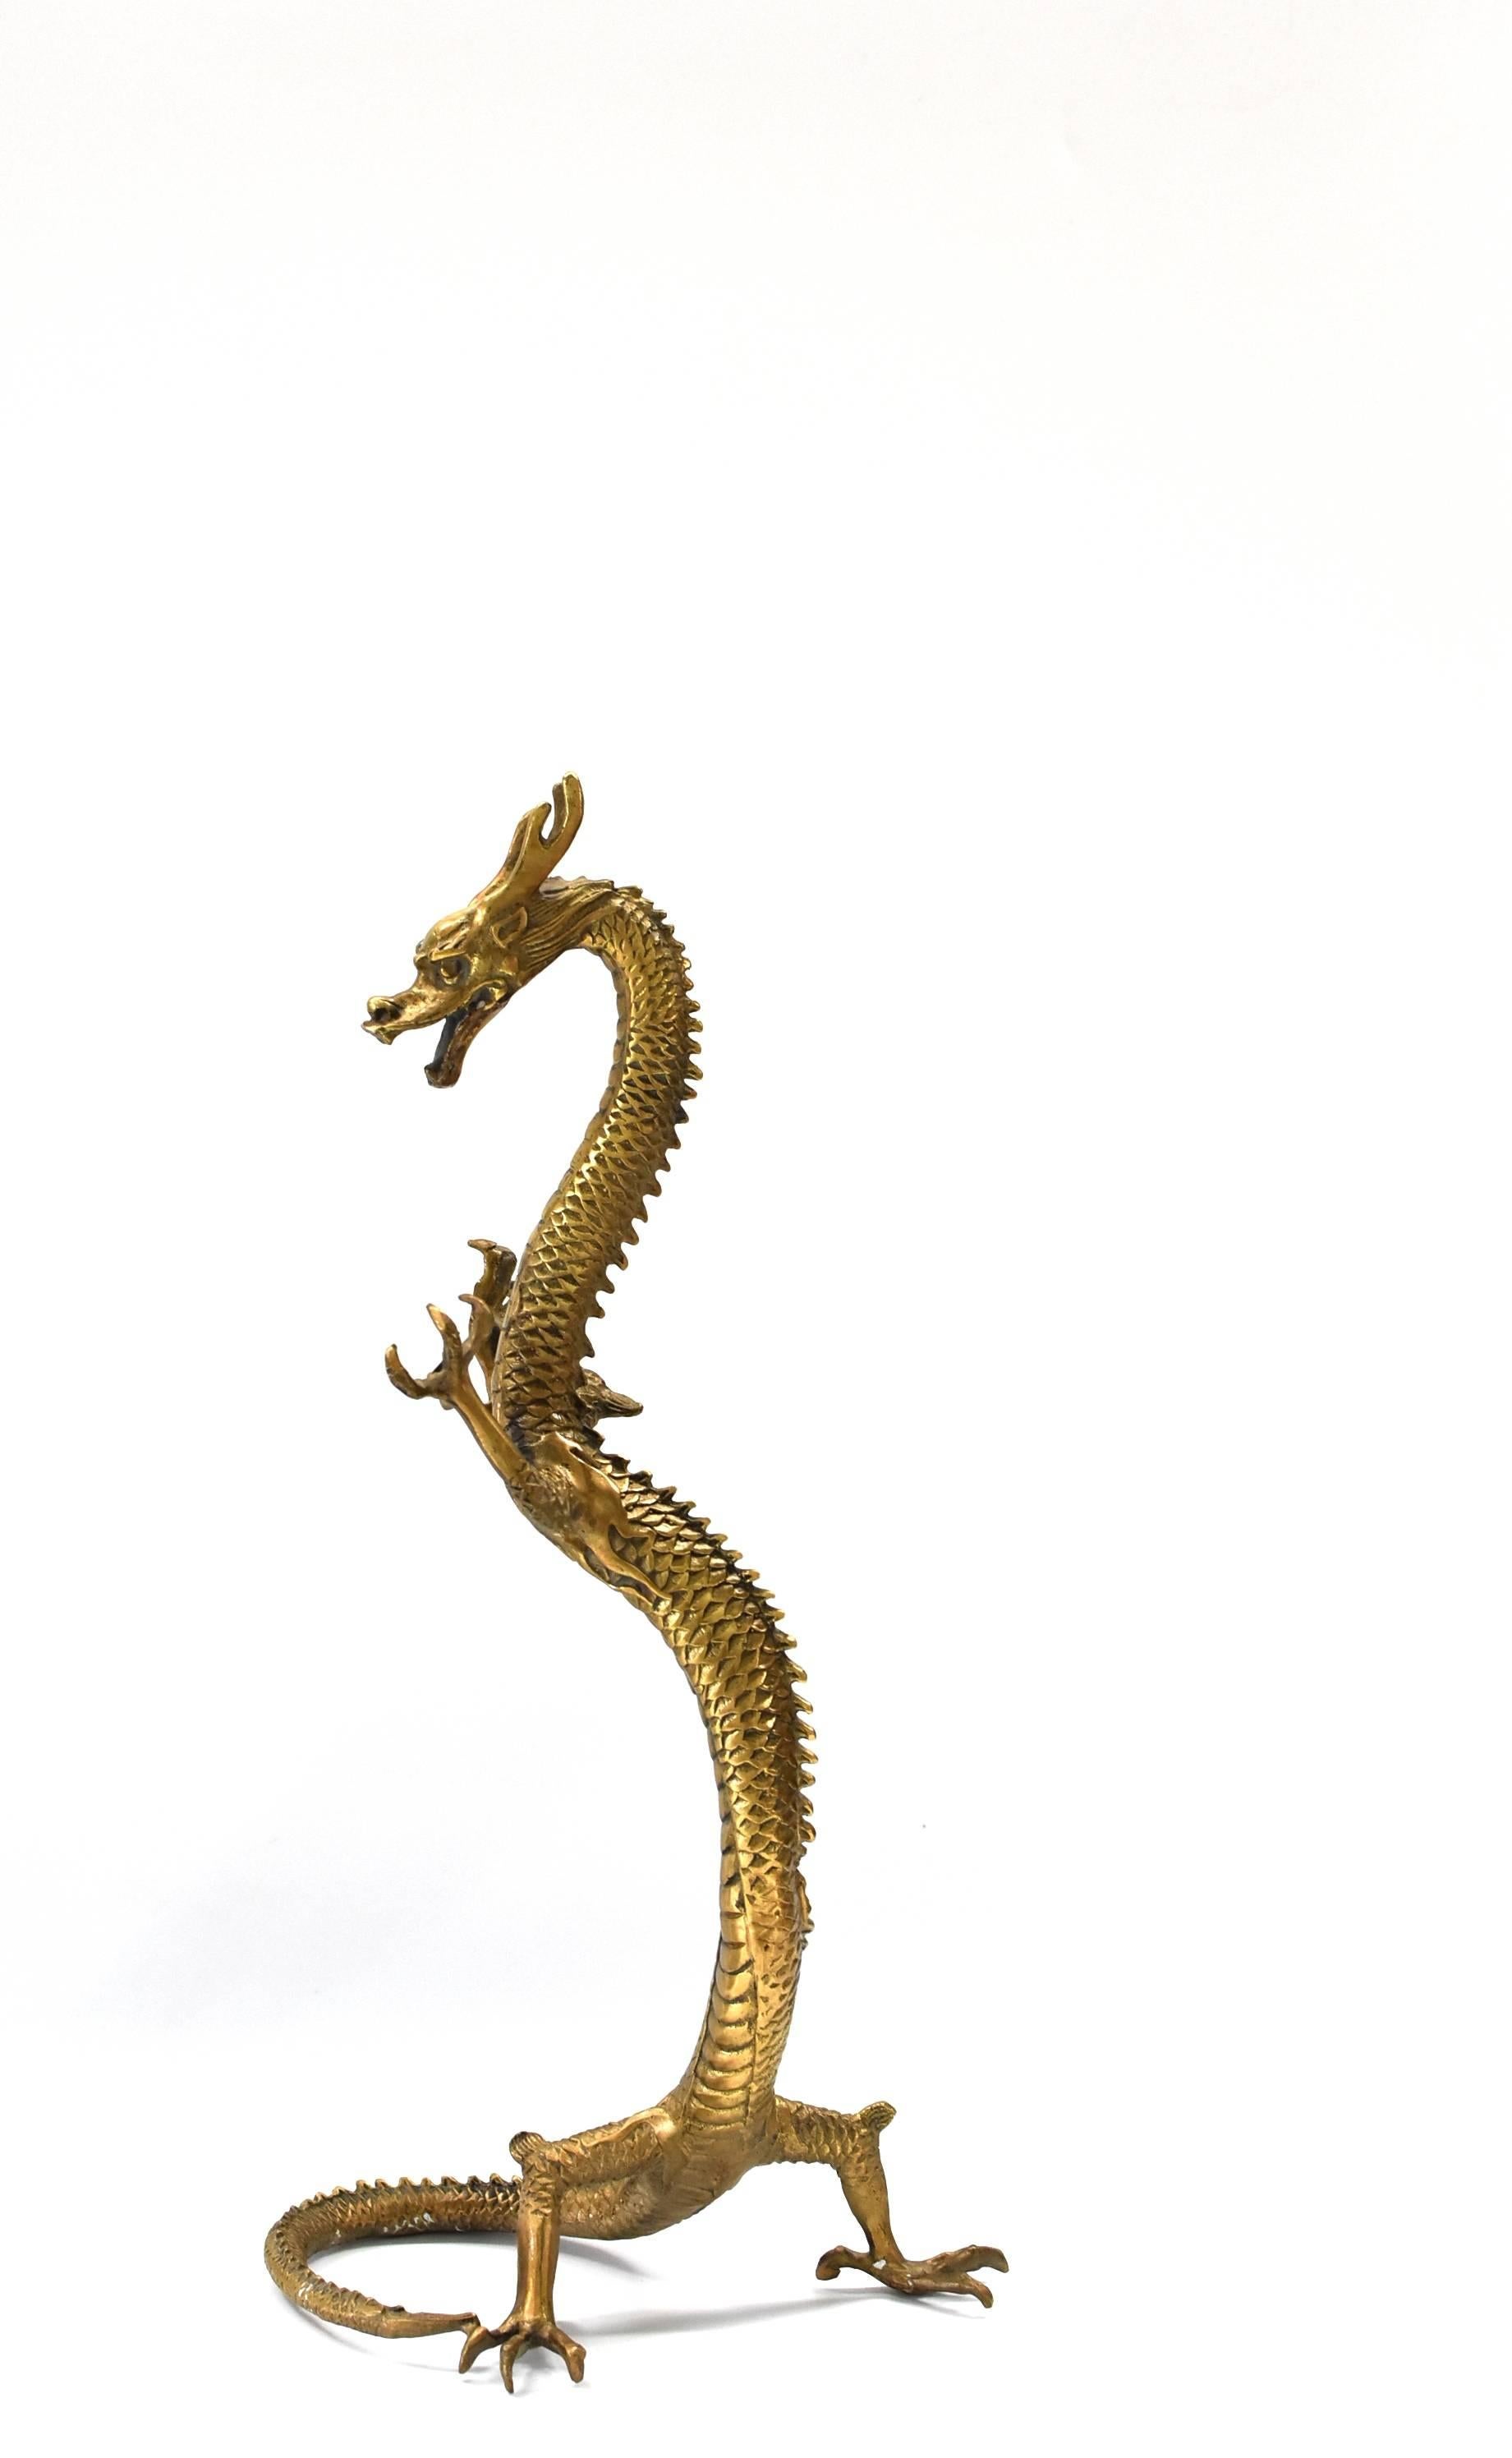 Last piece in the collection. The sign of Emperor, Dragon is the most important symbol of power, leadership and prosperity in the Chinese culture. This piece is highly unique with the dragon in a standing position. It is playful and whimsical,